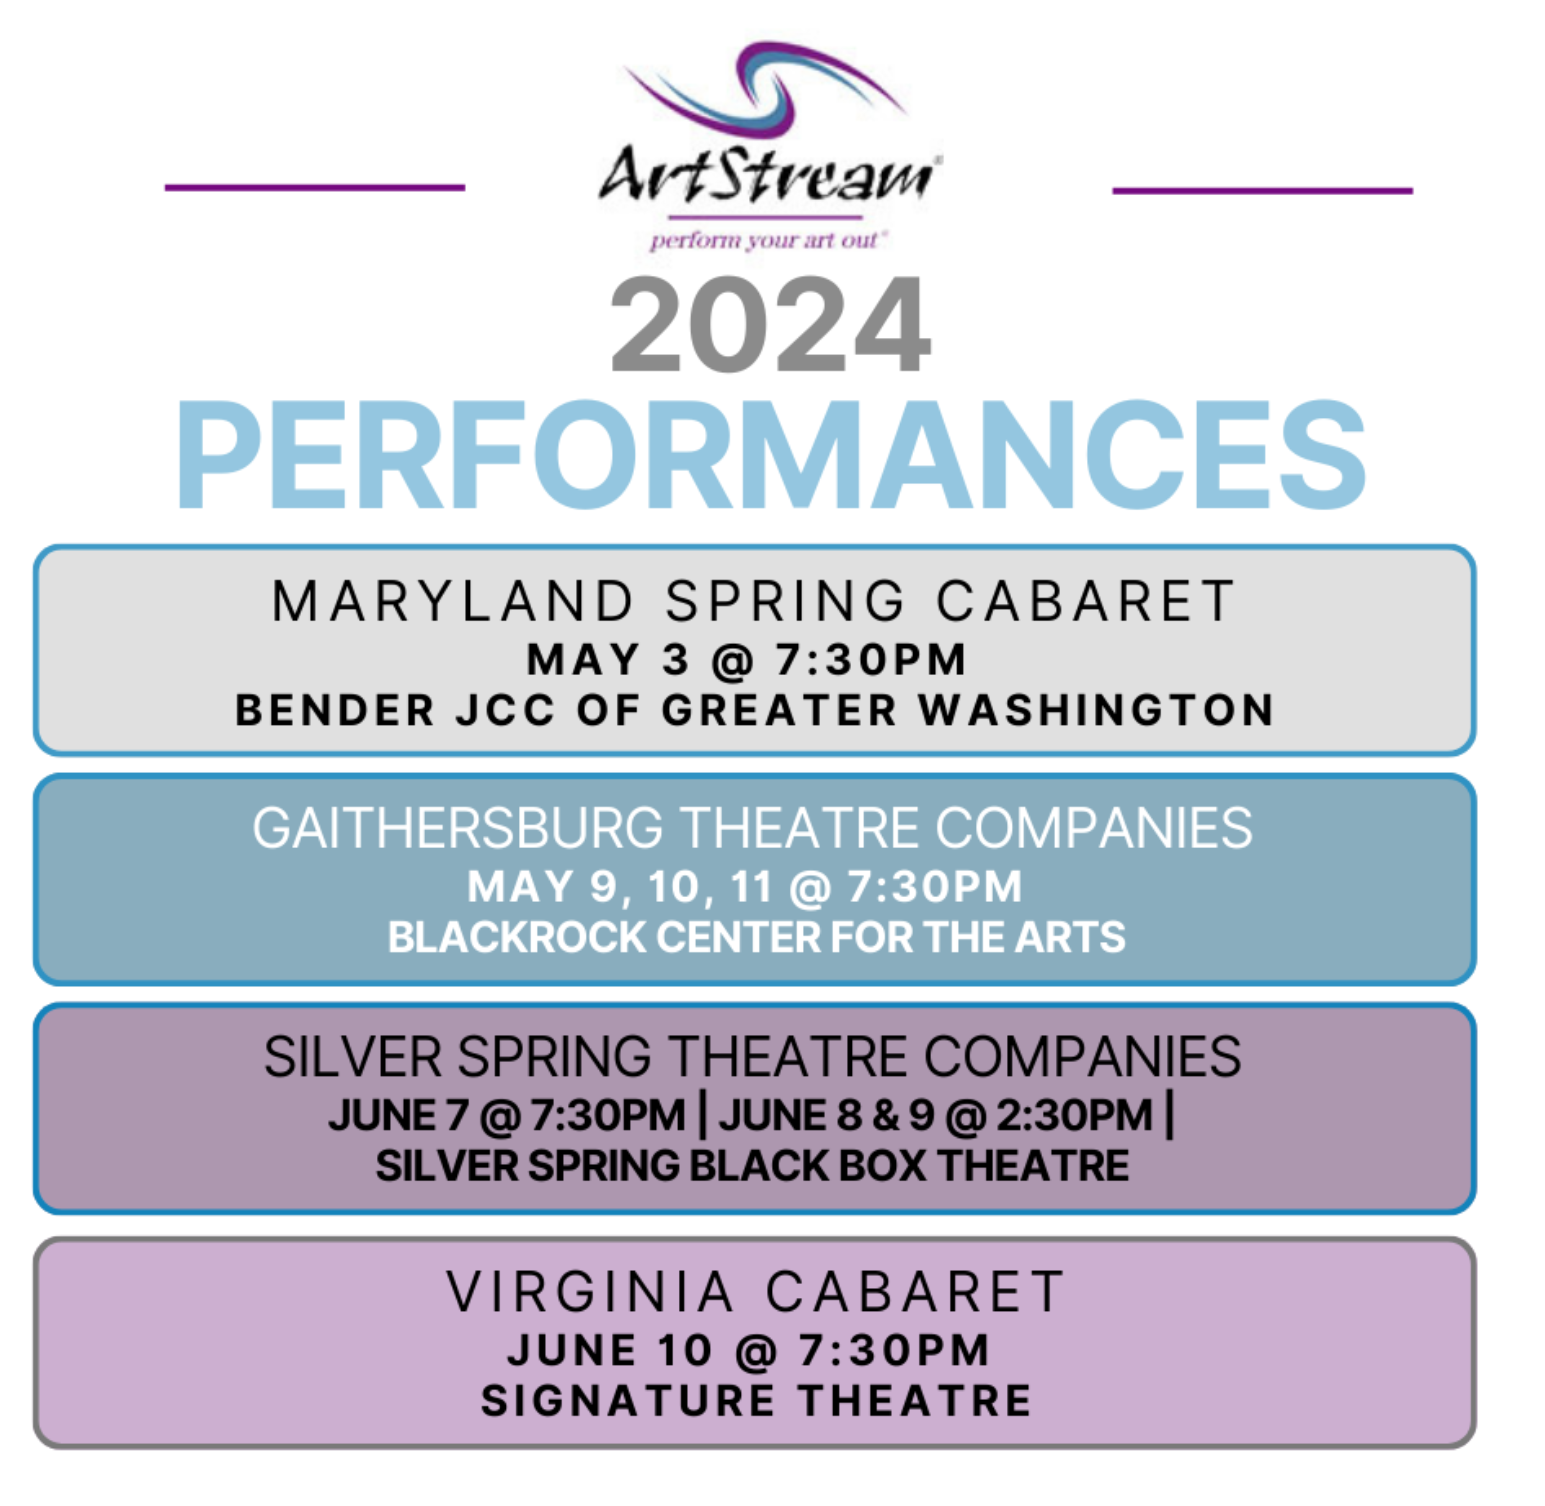 A graphic with the ArtStream logo reads 2020 Performances: MD Spring Cabaret, May 3 2024 @ 7:30pm Bender JCC of Greater Washington. Gaithersburg Theatre Companies May 9-11 2024 @ 7:30, BlackRock Center for the Arts. Silver Spring Theatre Companies June 7 @ 7:30pm, June 8 & 9 @ 2:30pm. Virginia Cabaret June 10 @ 7:30pm Signature Theatre. https://www.onthestage.tickets/artstream